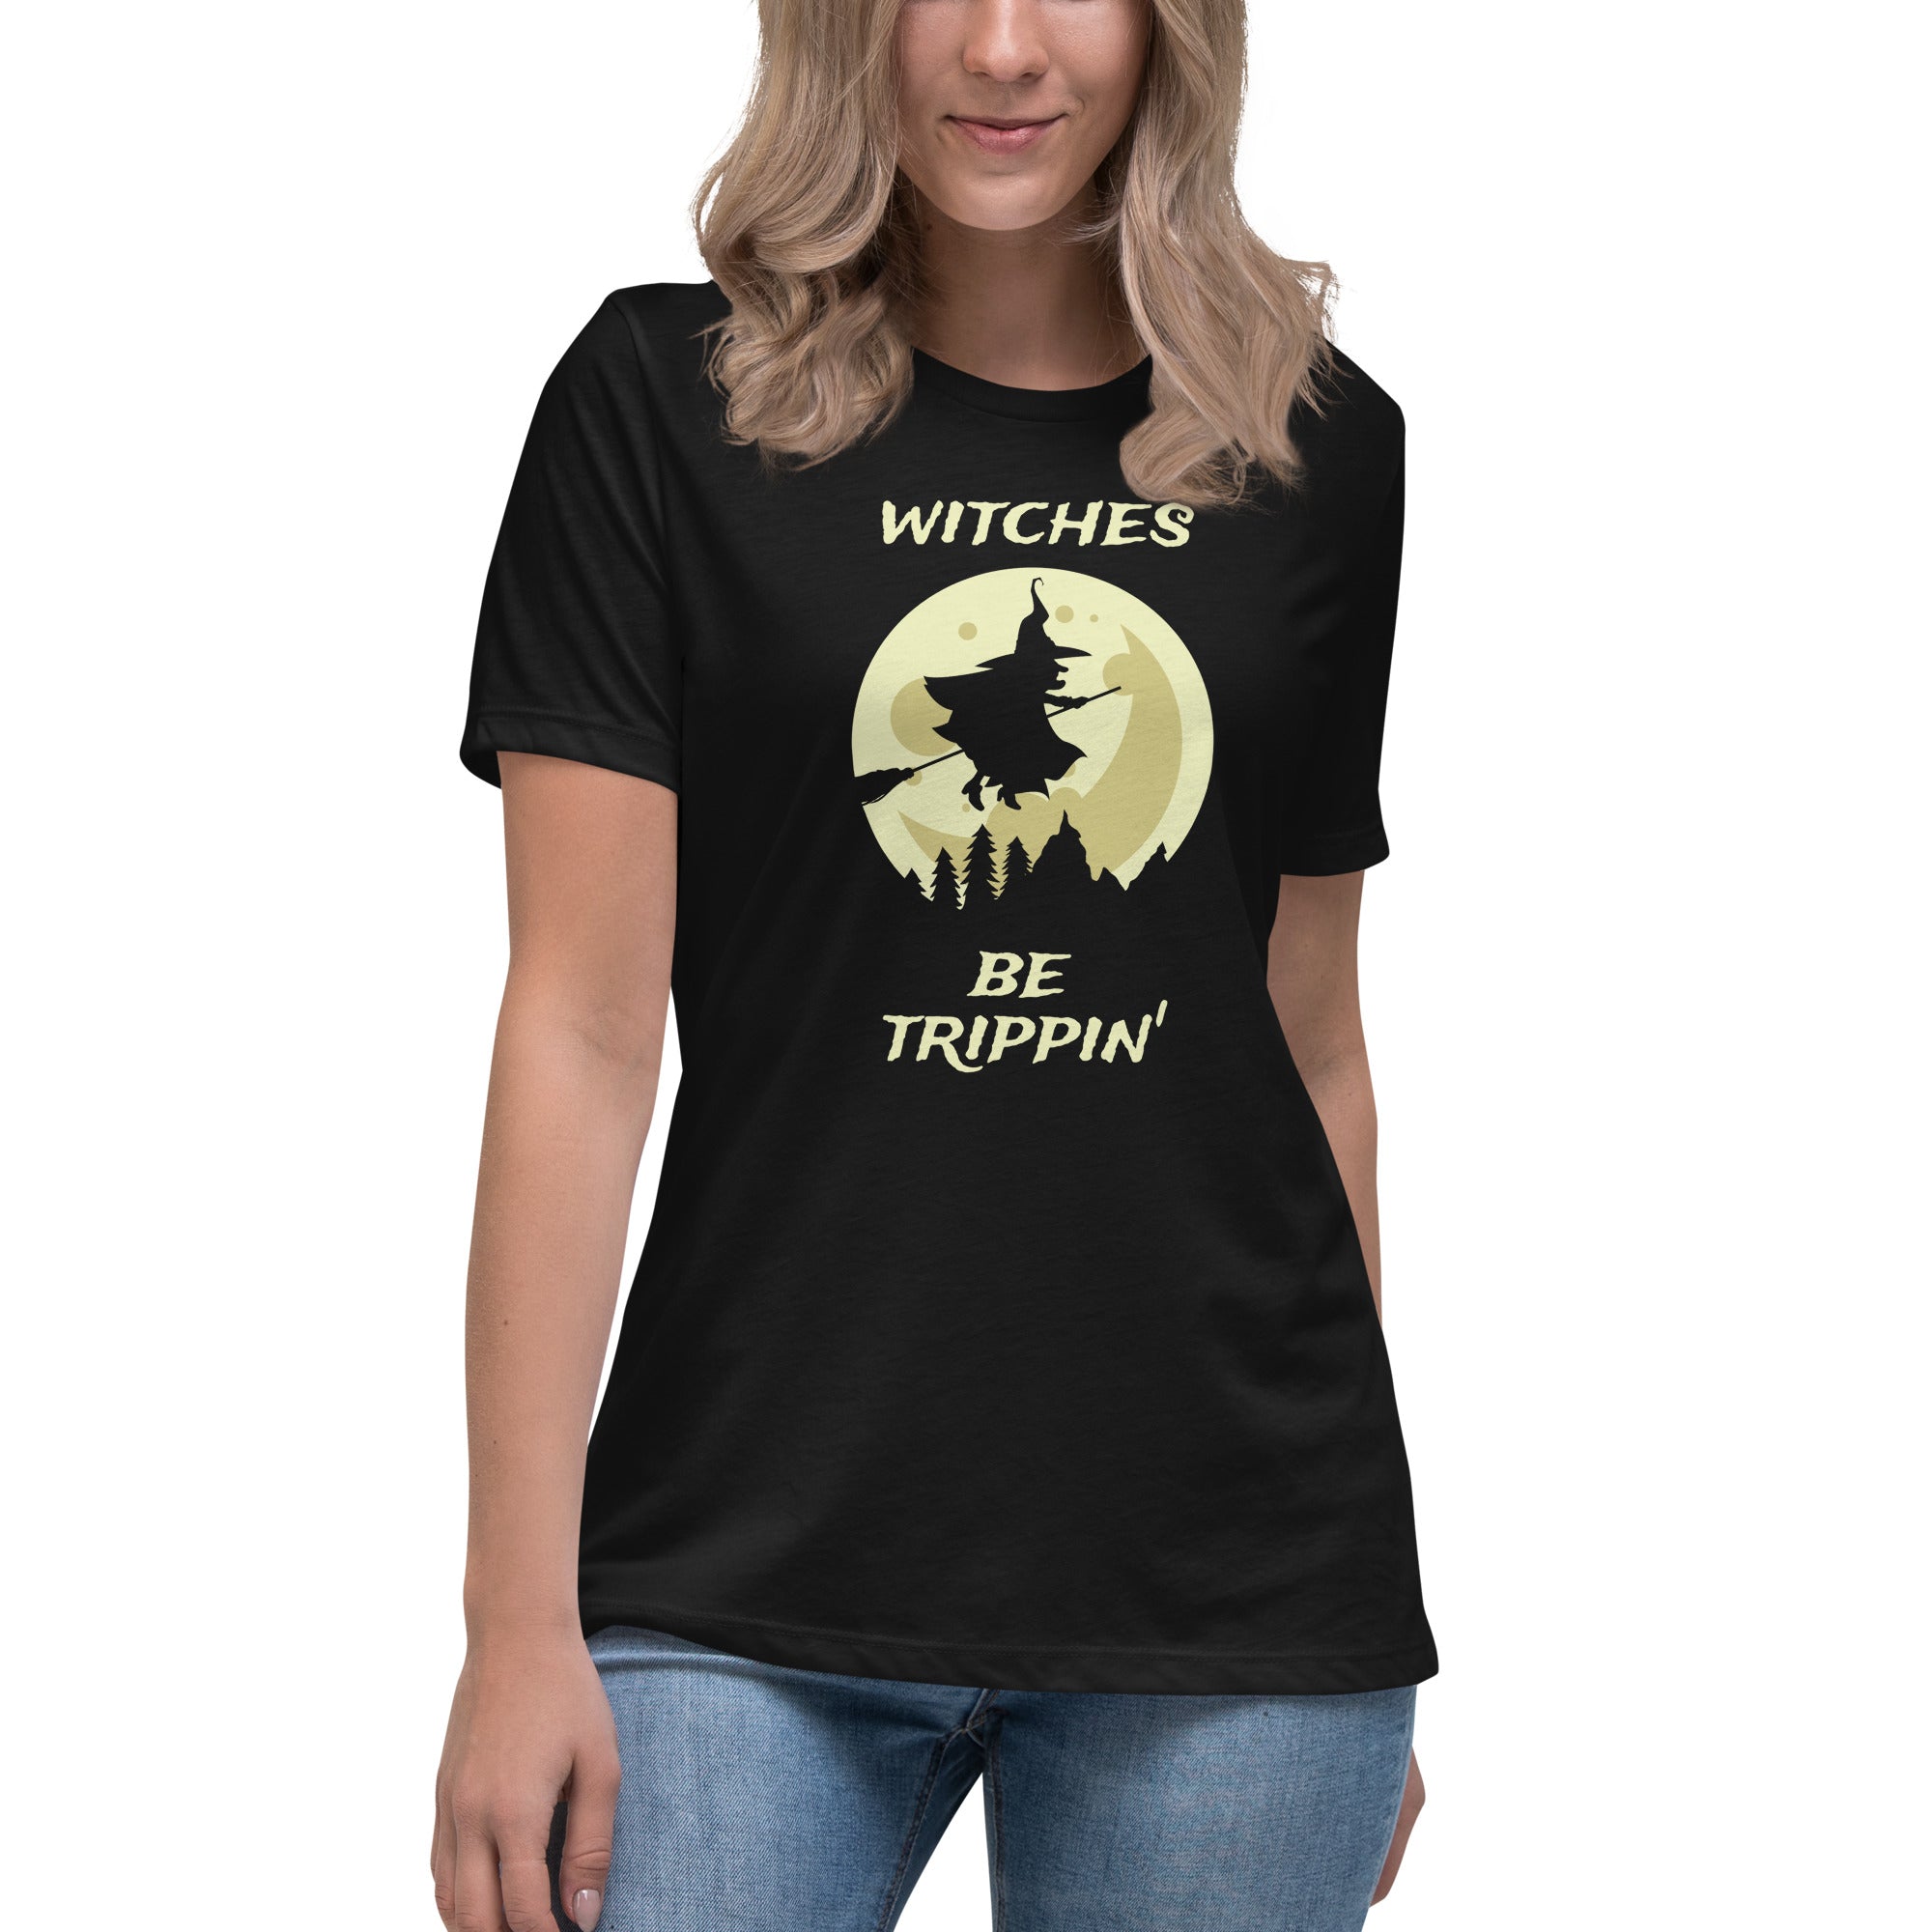 Witches Be Trippin' Women's Relaxed T-Shirt